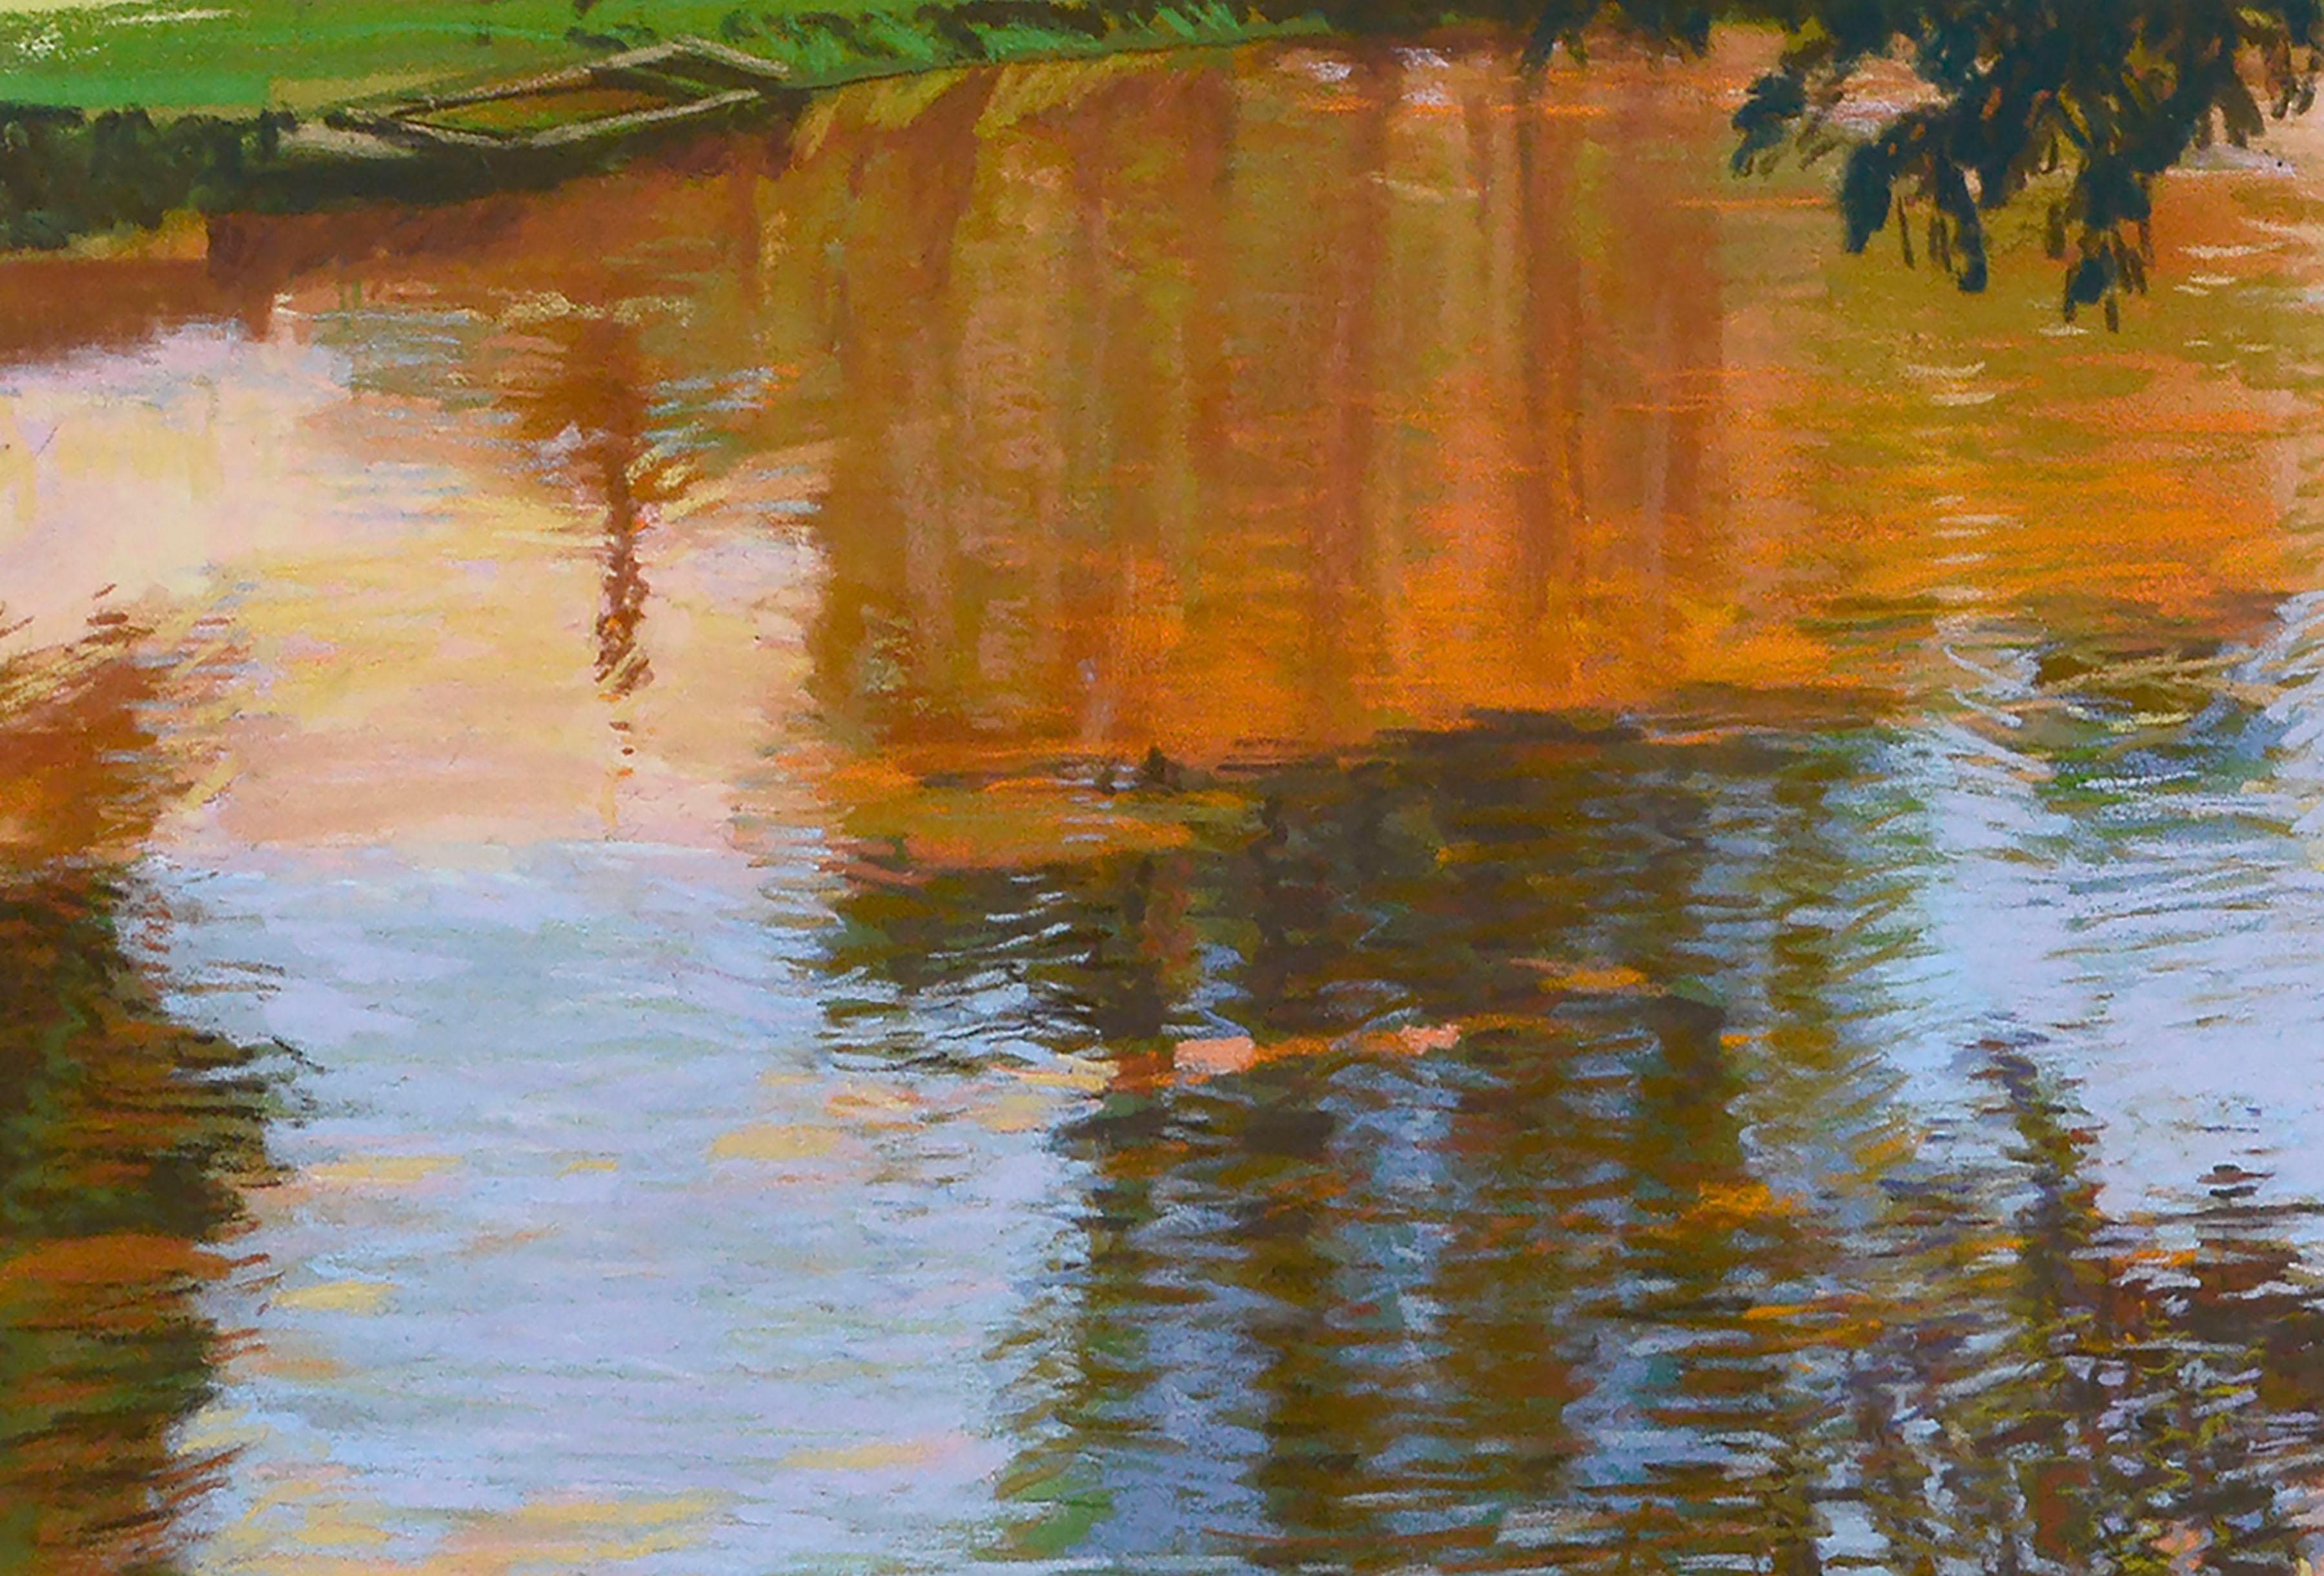 Colorful Lake Reflections, Large-Scale Pastel Landscape with Ducks - Beige Landscape Art by Unknown